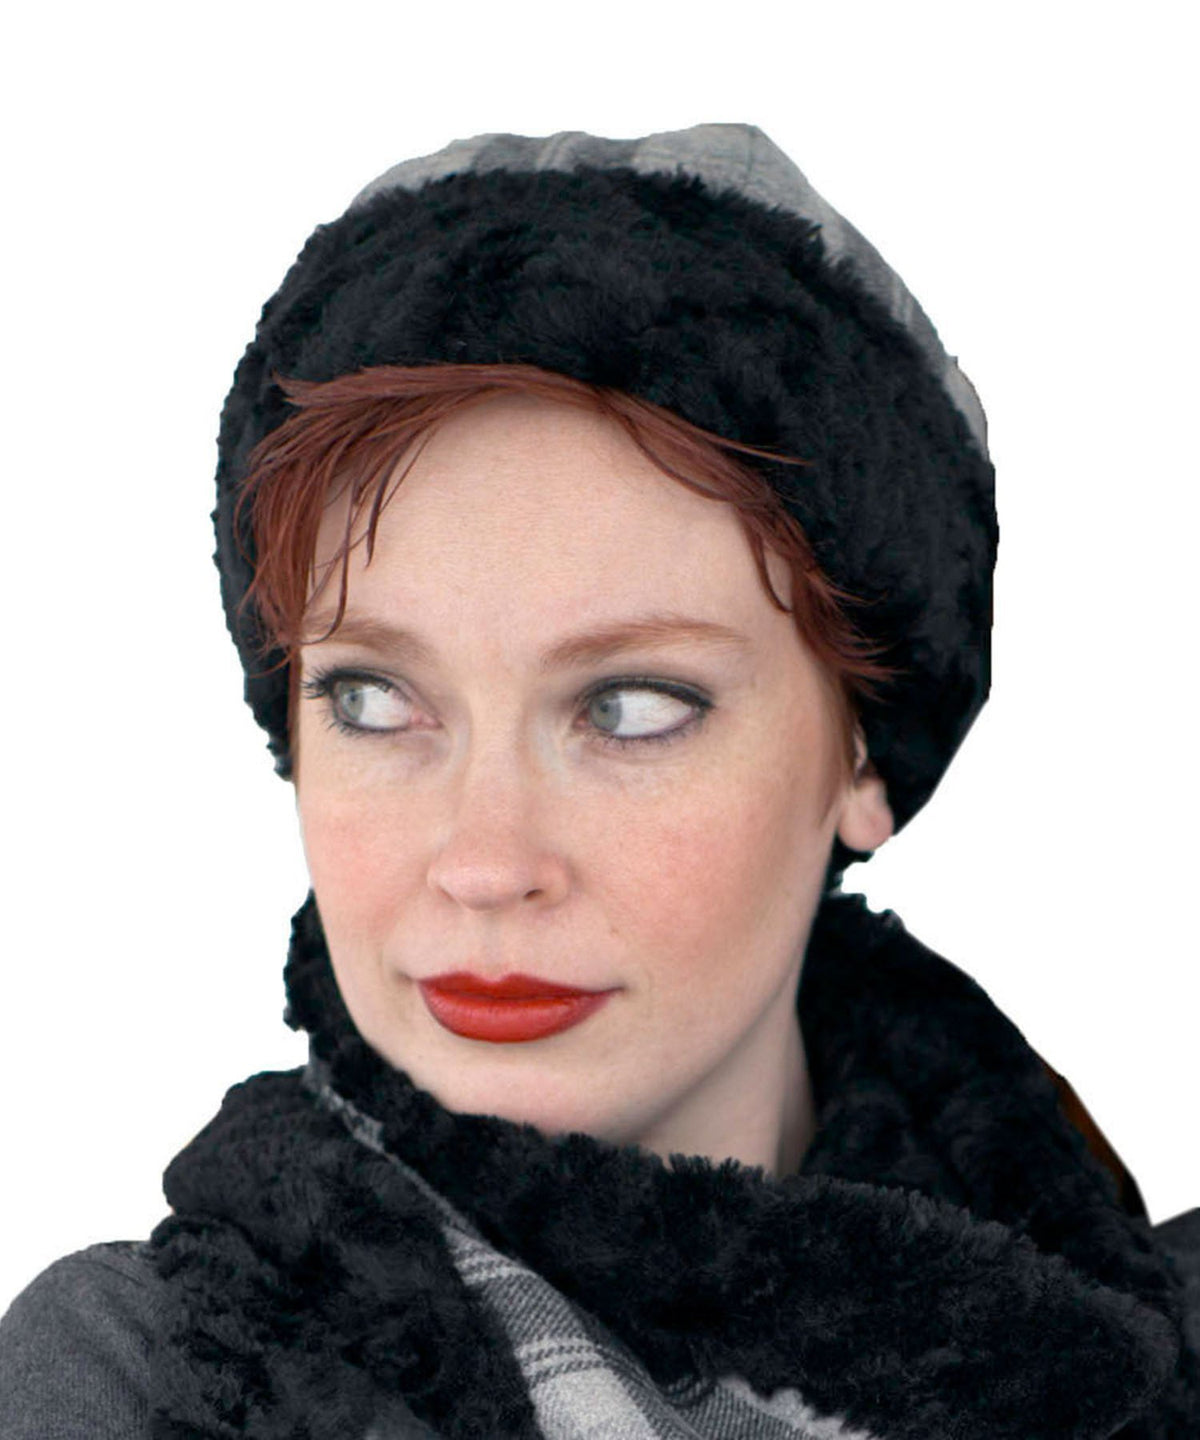 Beanie Hat, Structured - Wool Plaid in Twilight with Cuddly Faux Fur (Limited Availability)